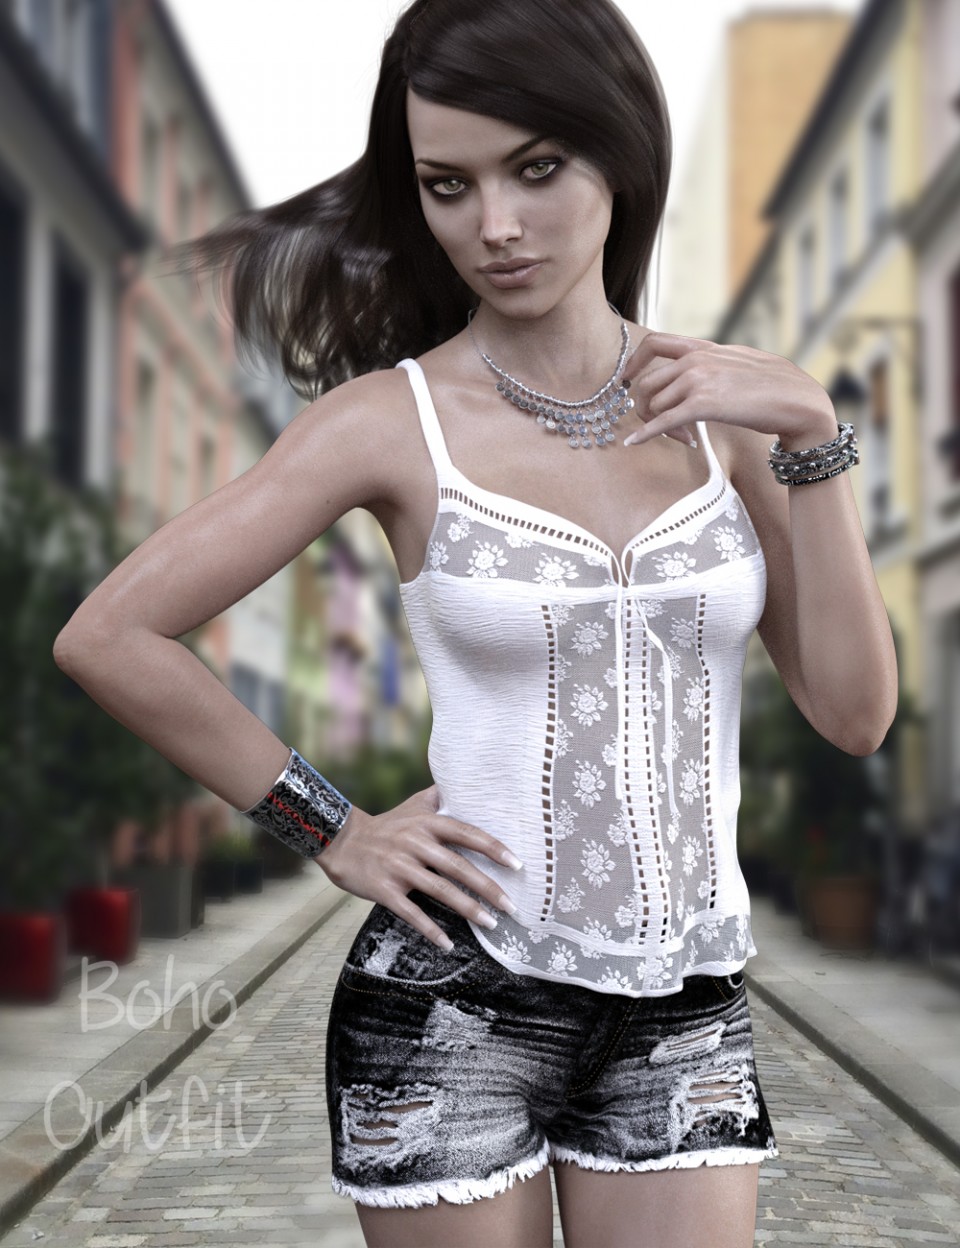 X-Fashion Boho Outfit for Genesis 3 Females(s)